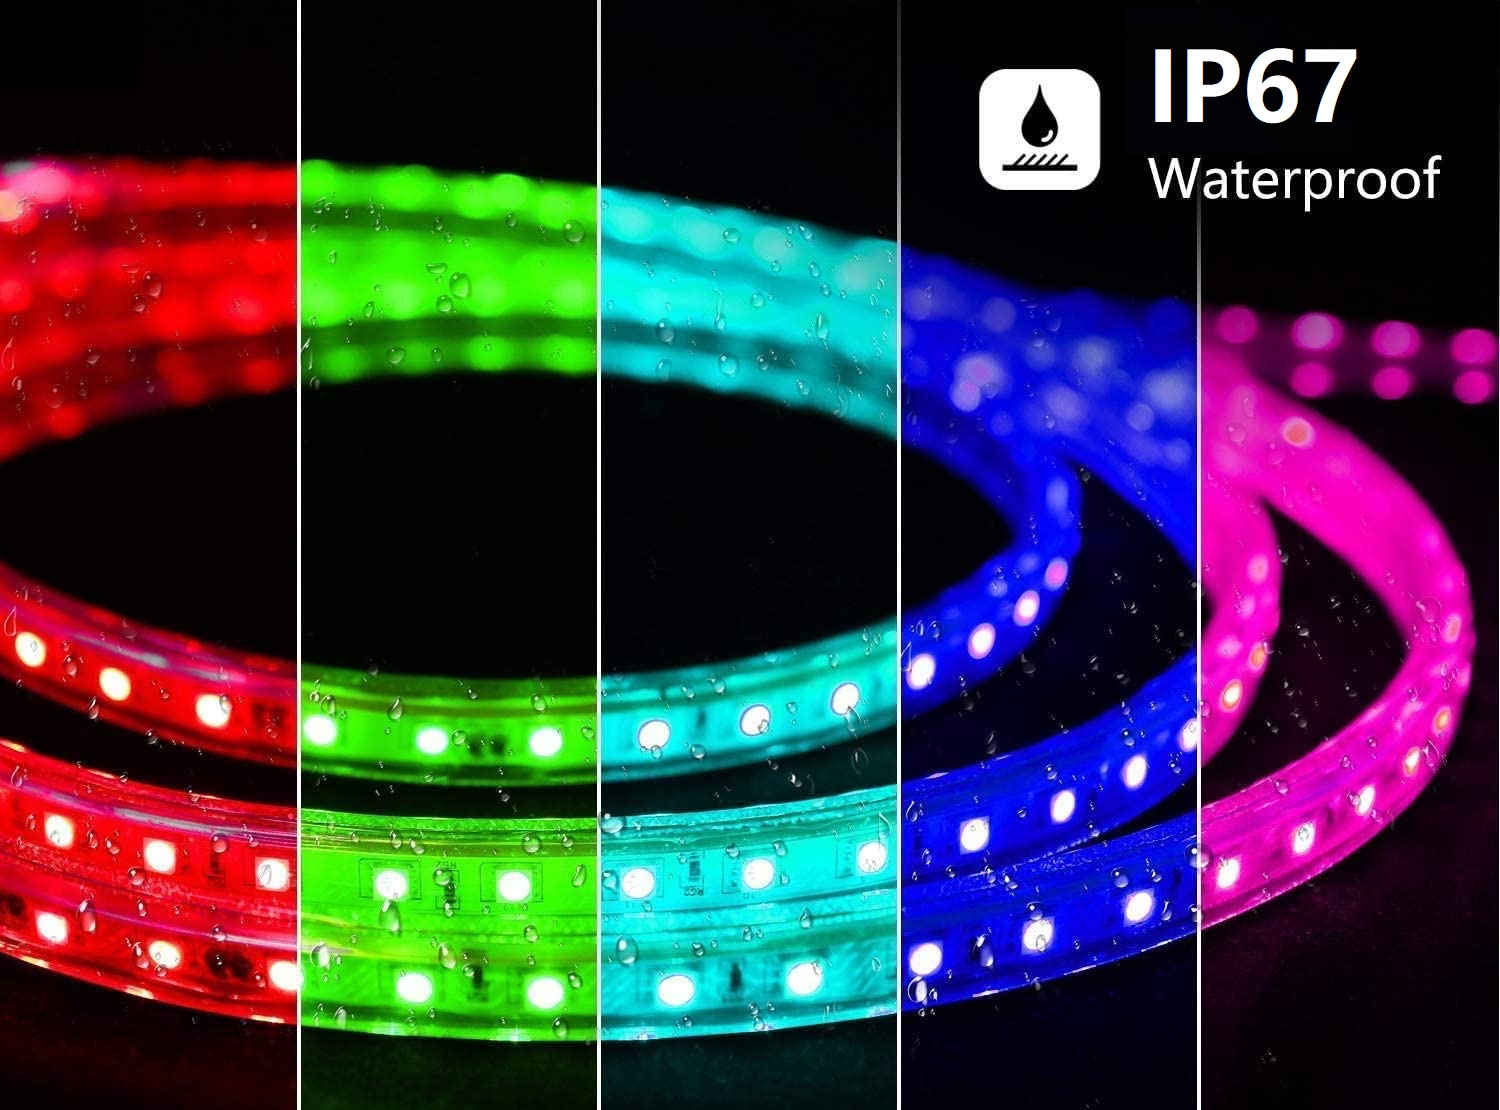 Led Strip Light For Decorating Spaces